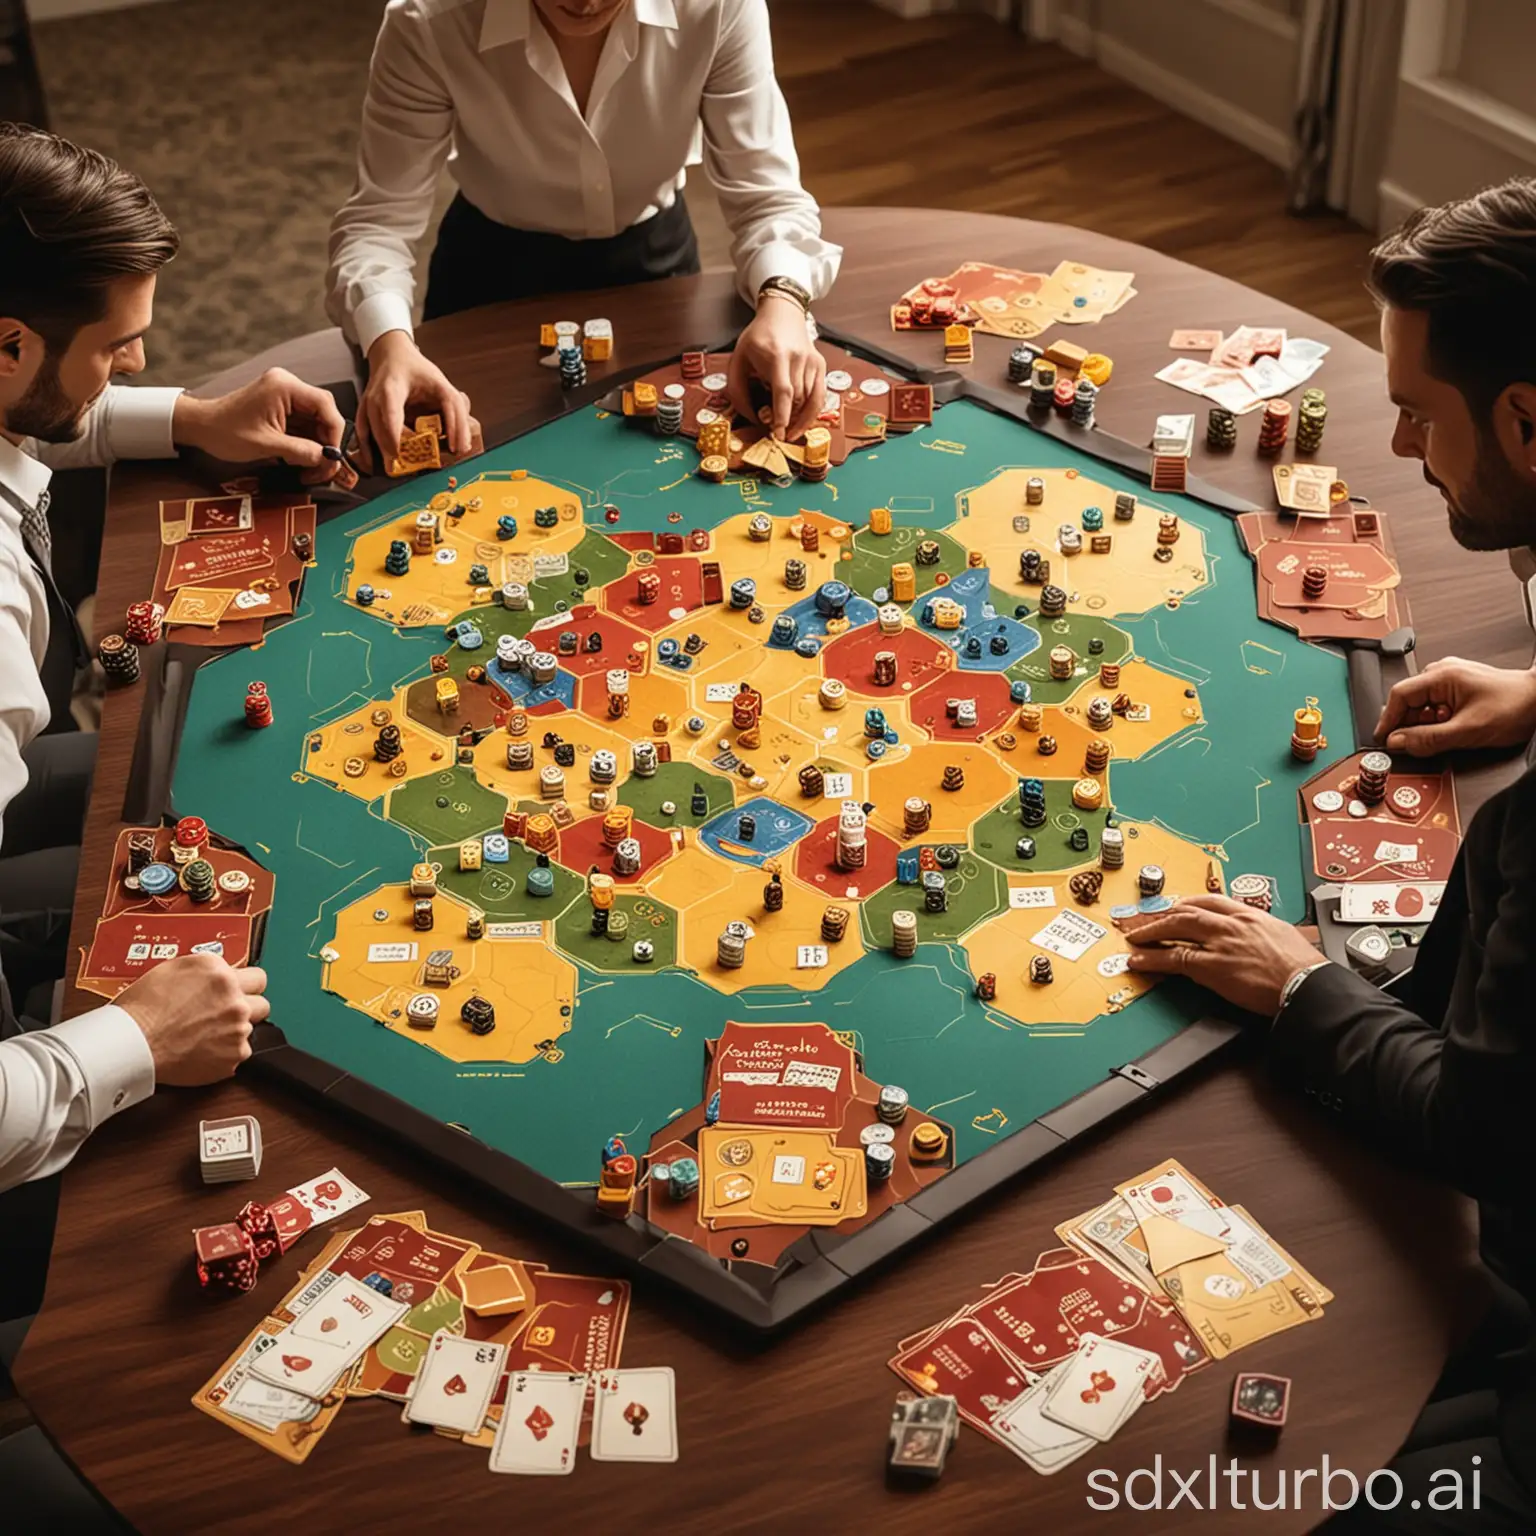 3 corporate personas near a casino table playing a war game look like catan, with a crupie delivering strategic cards